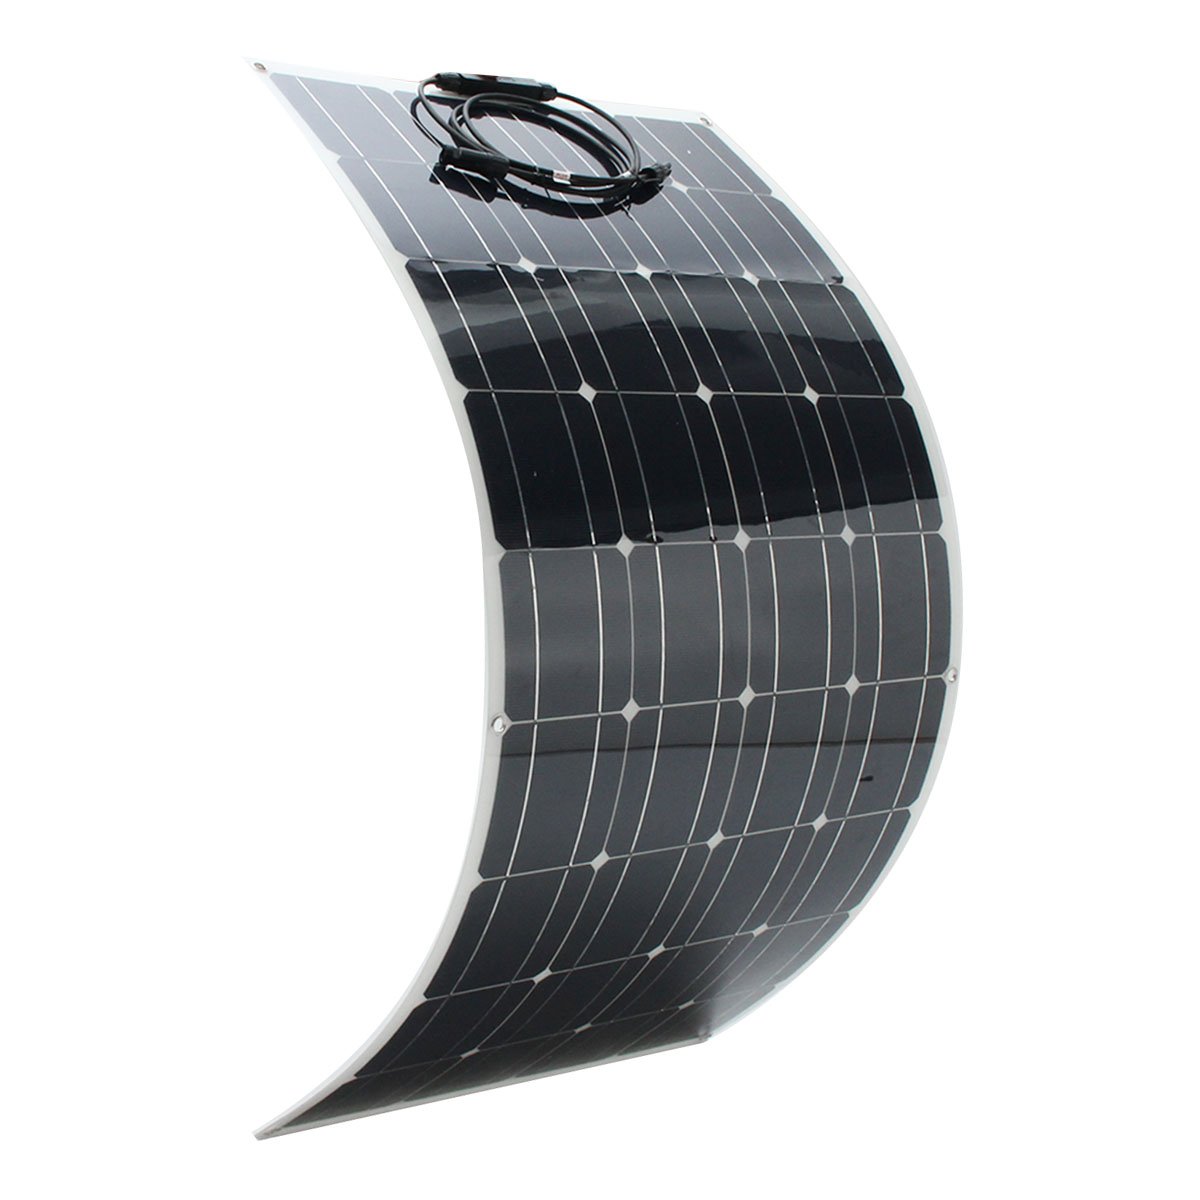 Elfeland® SP-39 120W 1180*540mm Semi-Flexible Solar Panel With 1.5m Cable Front Junction Box 1